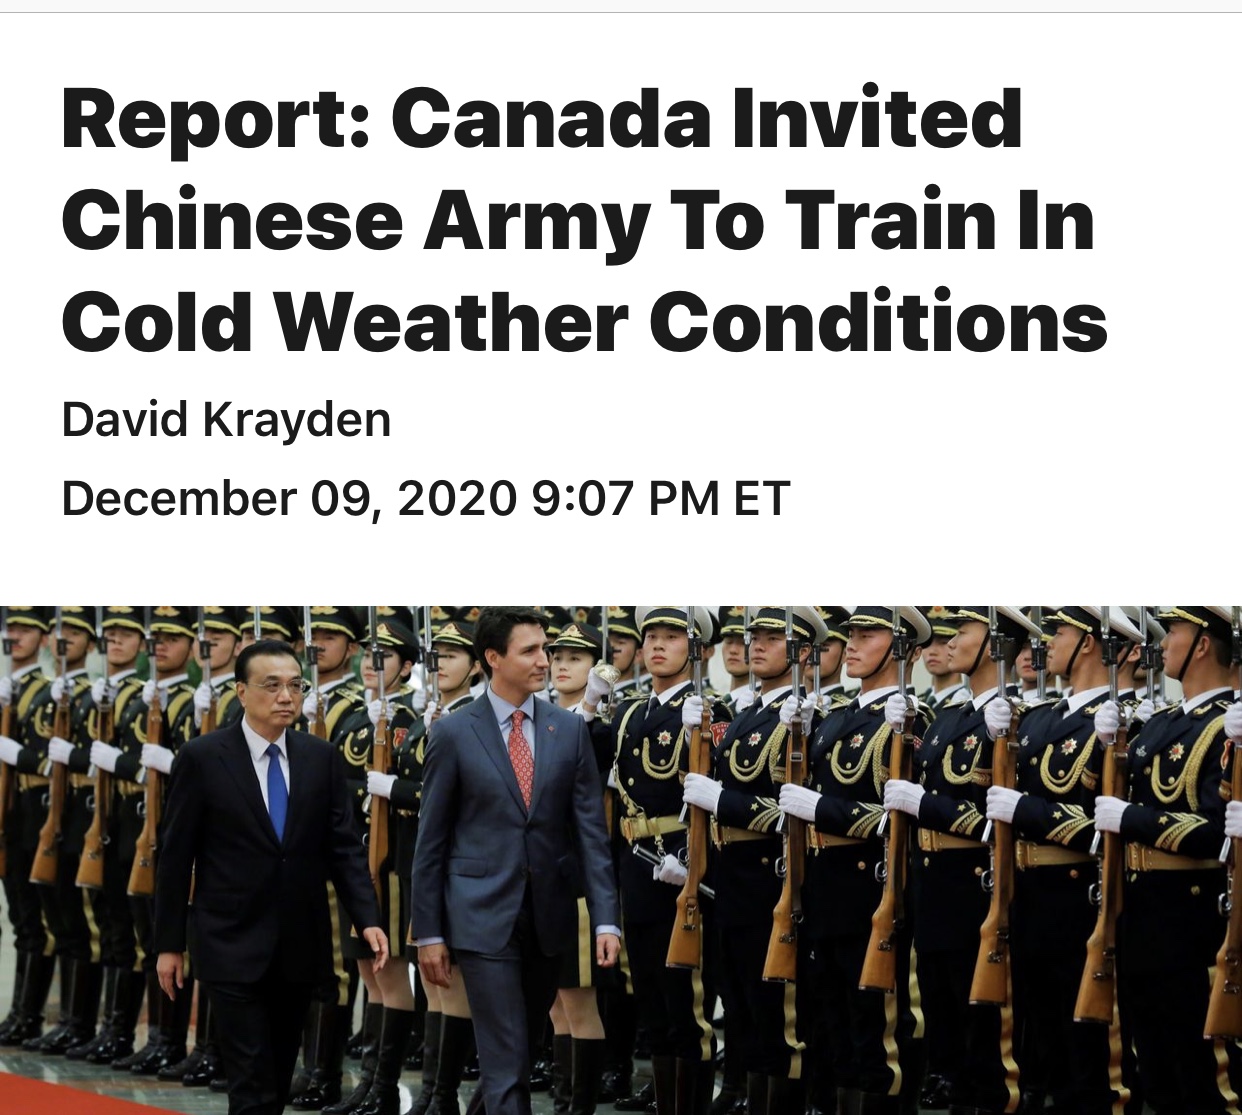 Breaking News Canada Invited Chinese Army To Train In Cold Weather Conditions